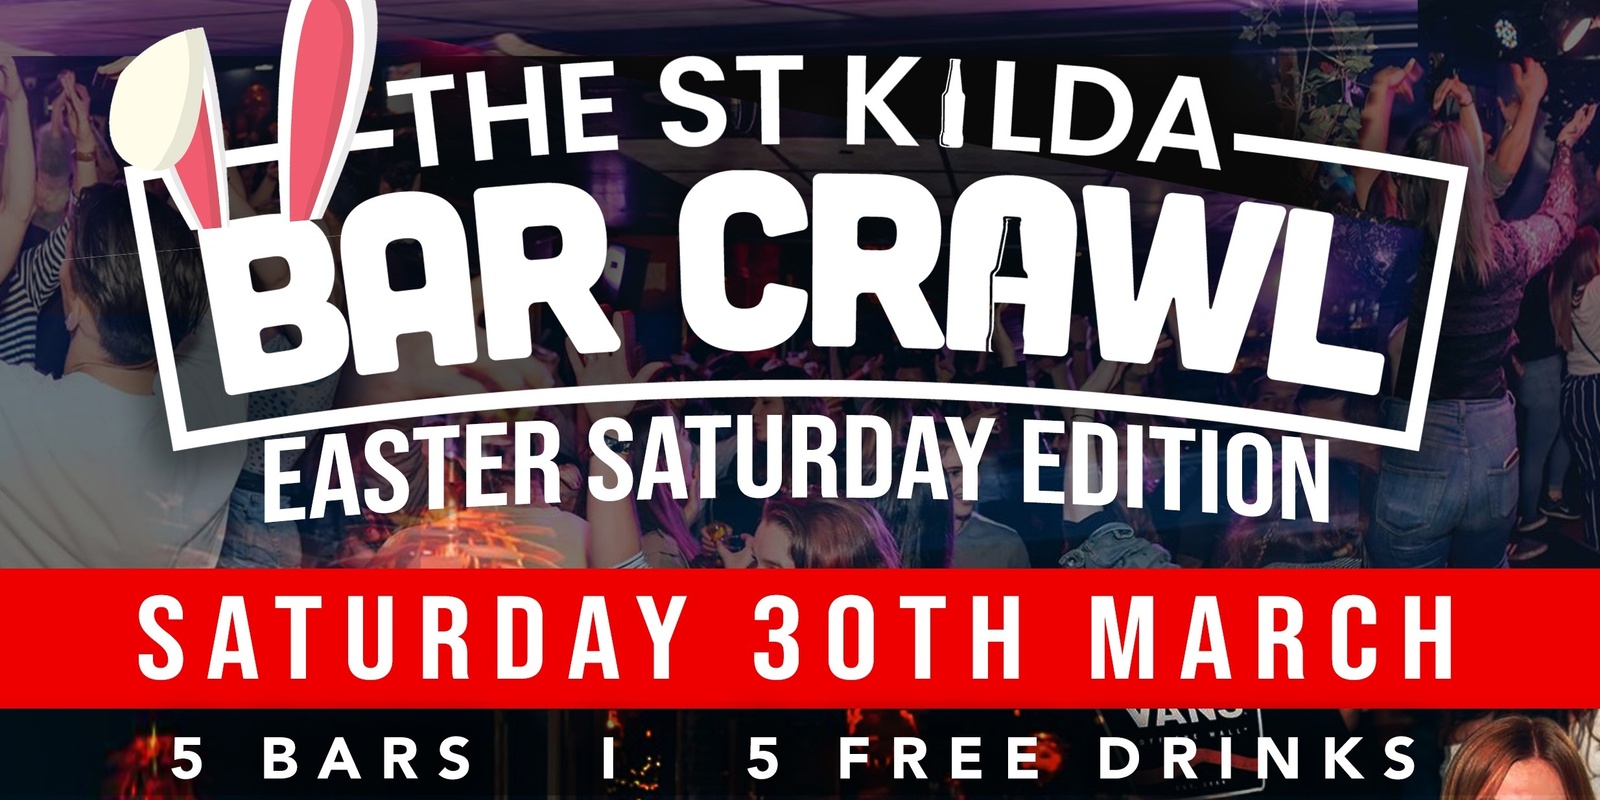 Banner image for The St Kilda Bar Crawl - Easter Saturday Edition